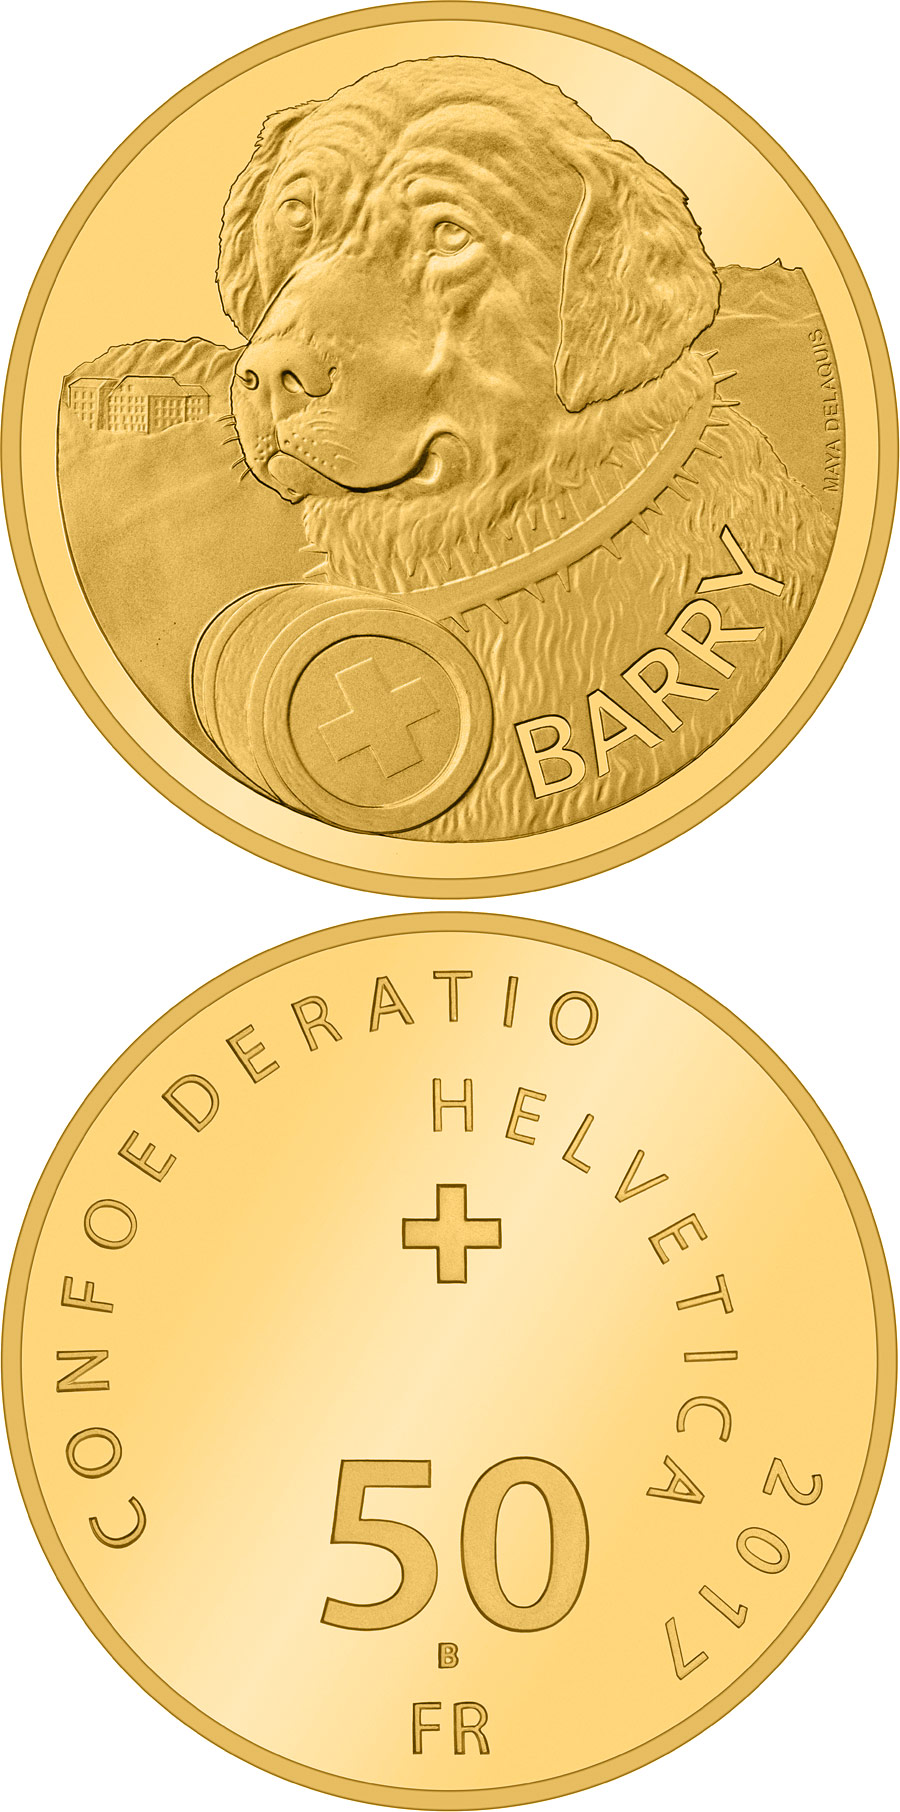 Image of 50 francs coin - Barry | Switzerland 2017.  The Gold coin is of Proof quality.